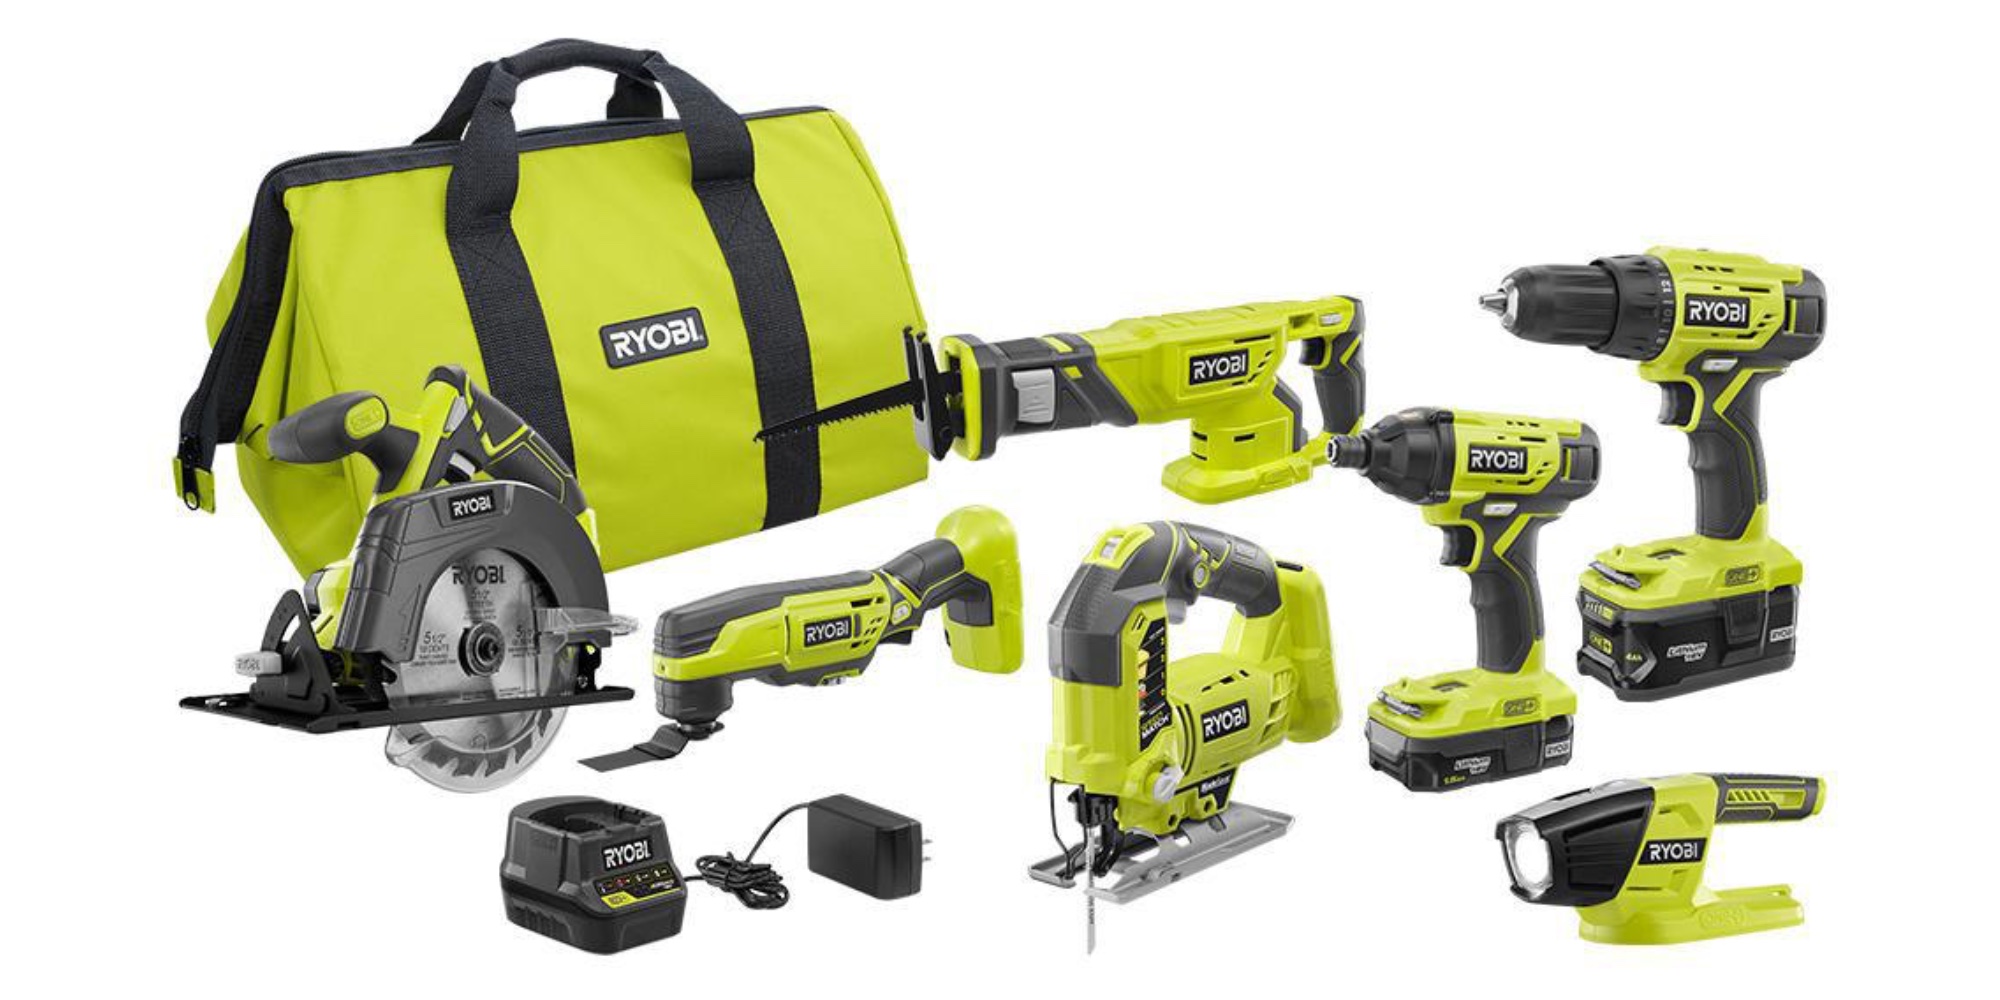 Home Depot's up to 30 off RYOBI sale is filled with tools, combo kits